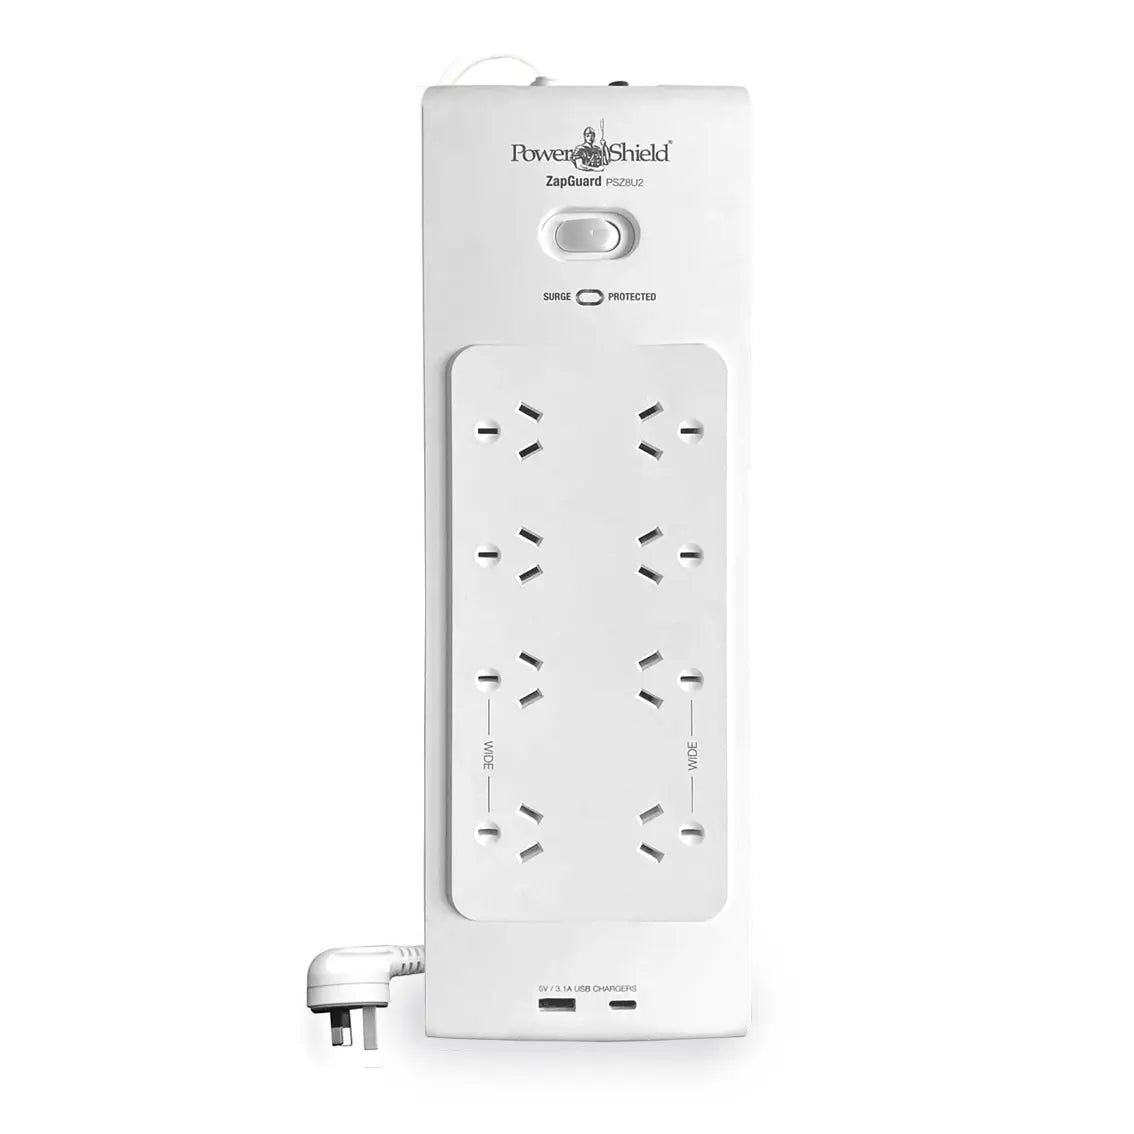 POWERSHIELD PSZ8U2 ZapGuard 8 Way Power Surge Filter Board, USB A / C  Connectors, Wide Spaced Sockets, Wall Mountable,$60,000 Connected Equipment POWERSHIELD